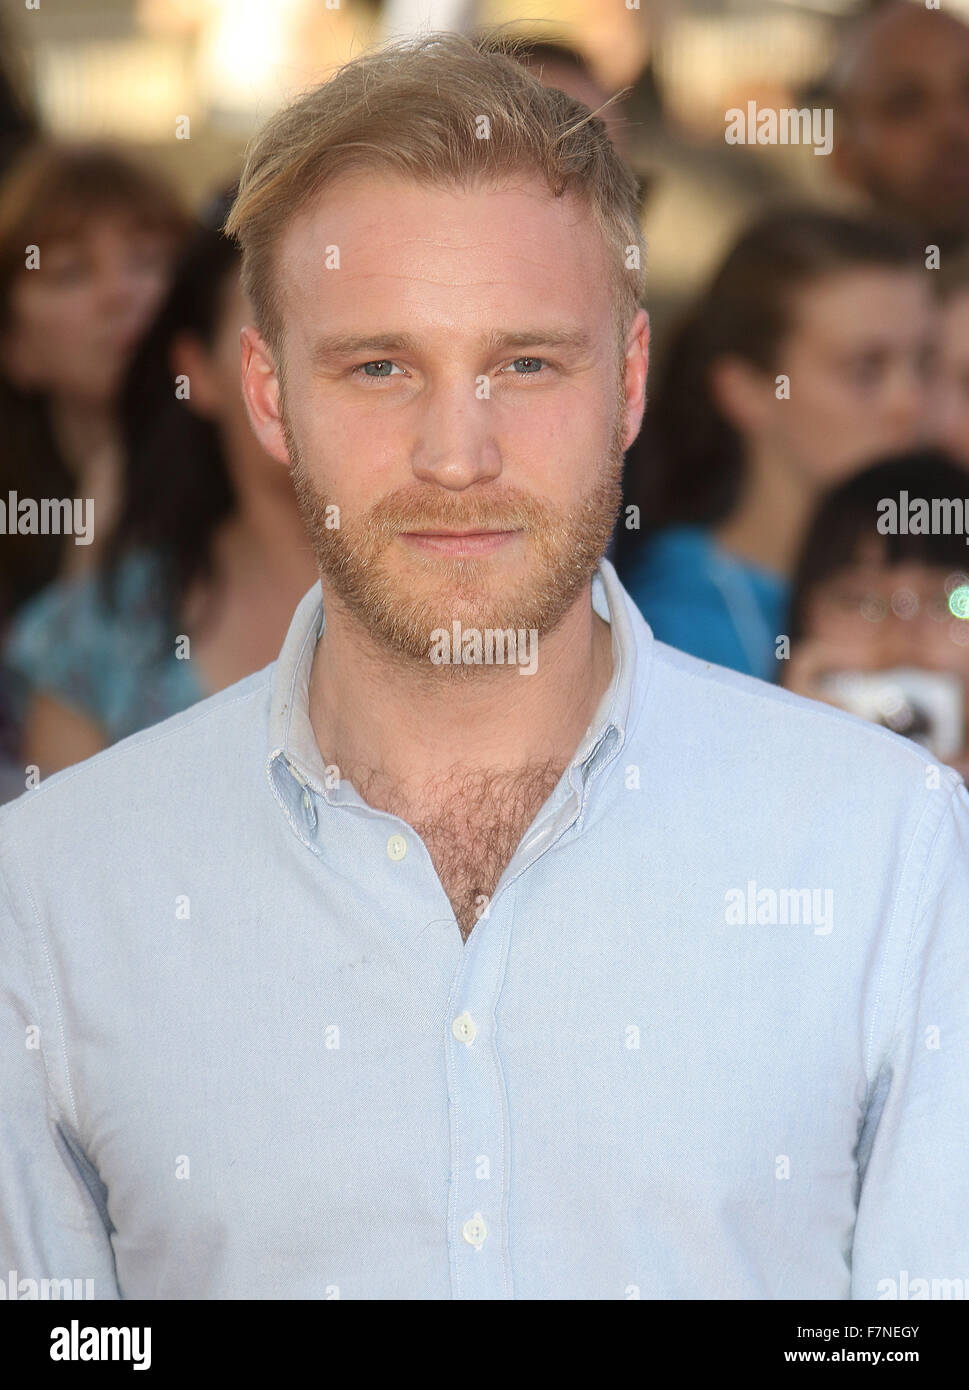 Apr 15, 2015 - London, England, UK - Sam Phillips attending Far From the Madding Crowd World Premiere, BFI Southbank Stock Photo